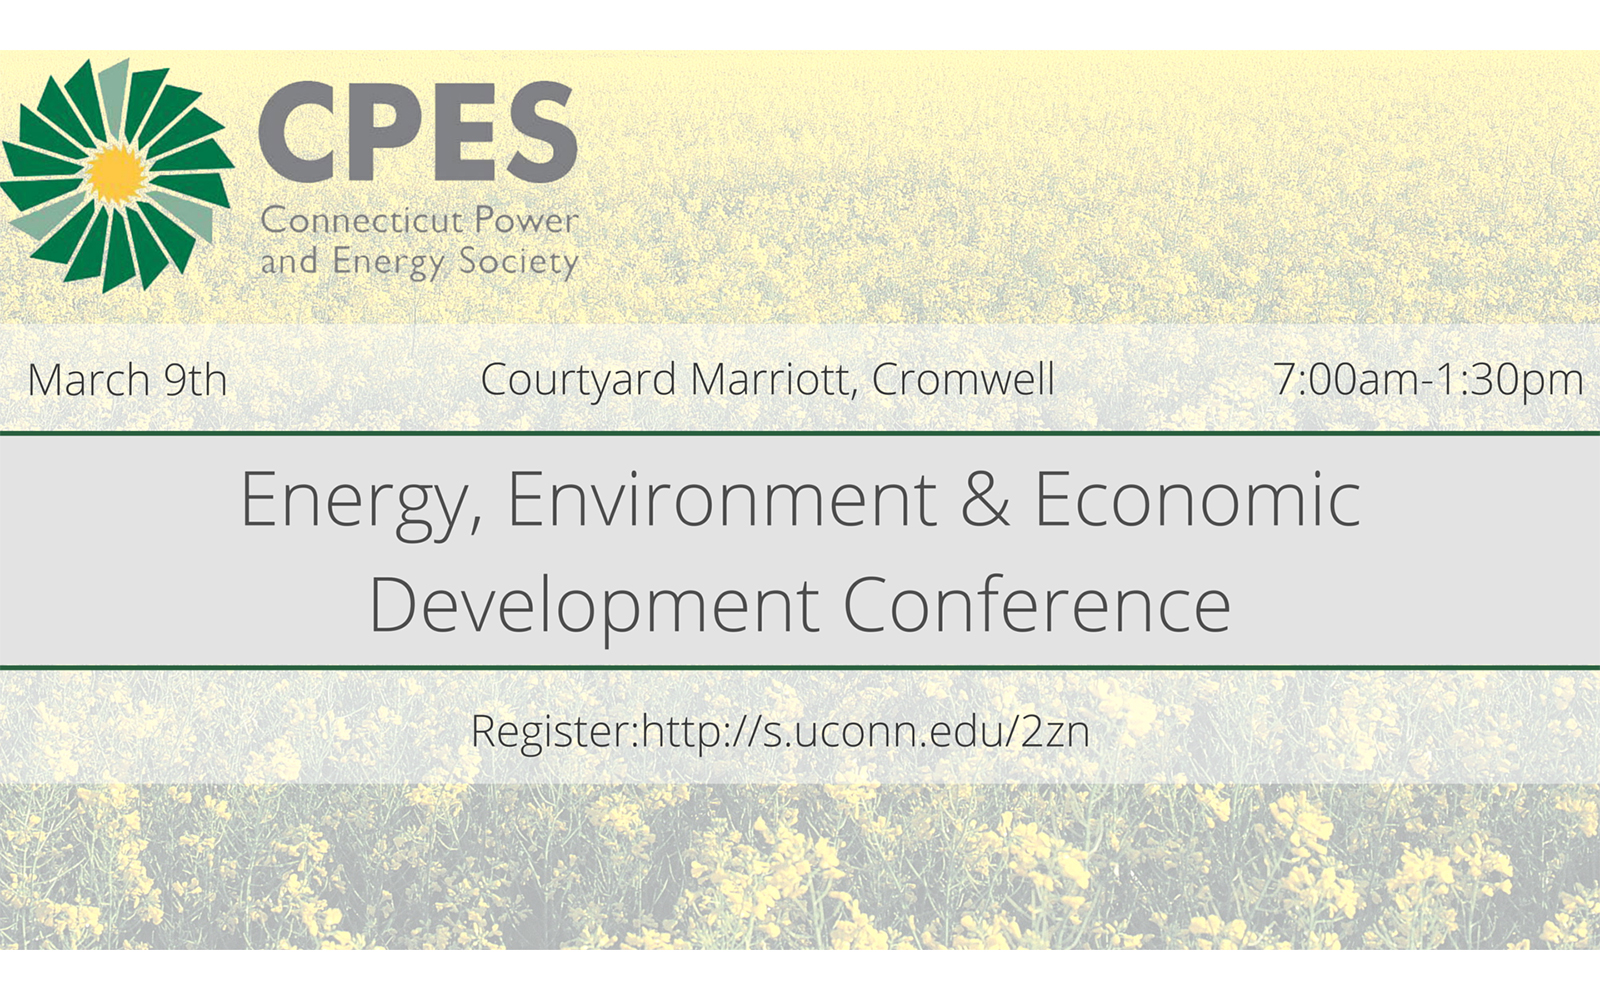 Connecticut Power and Energy Society presents the Energy, Environment & Economic Development Conference